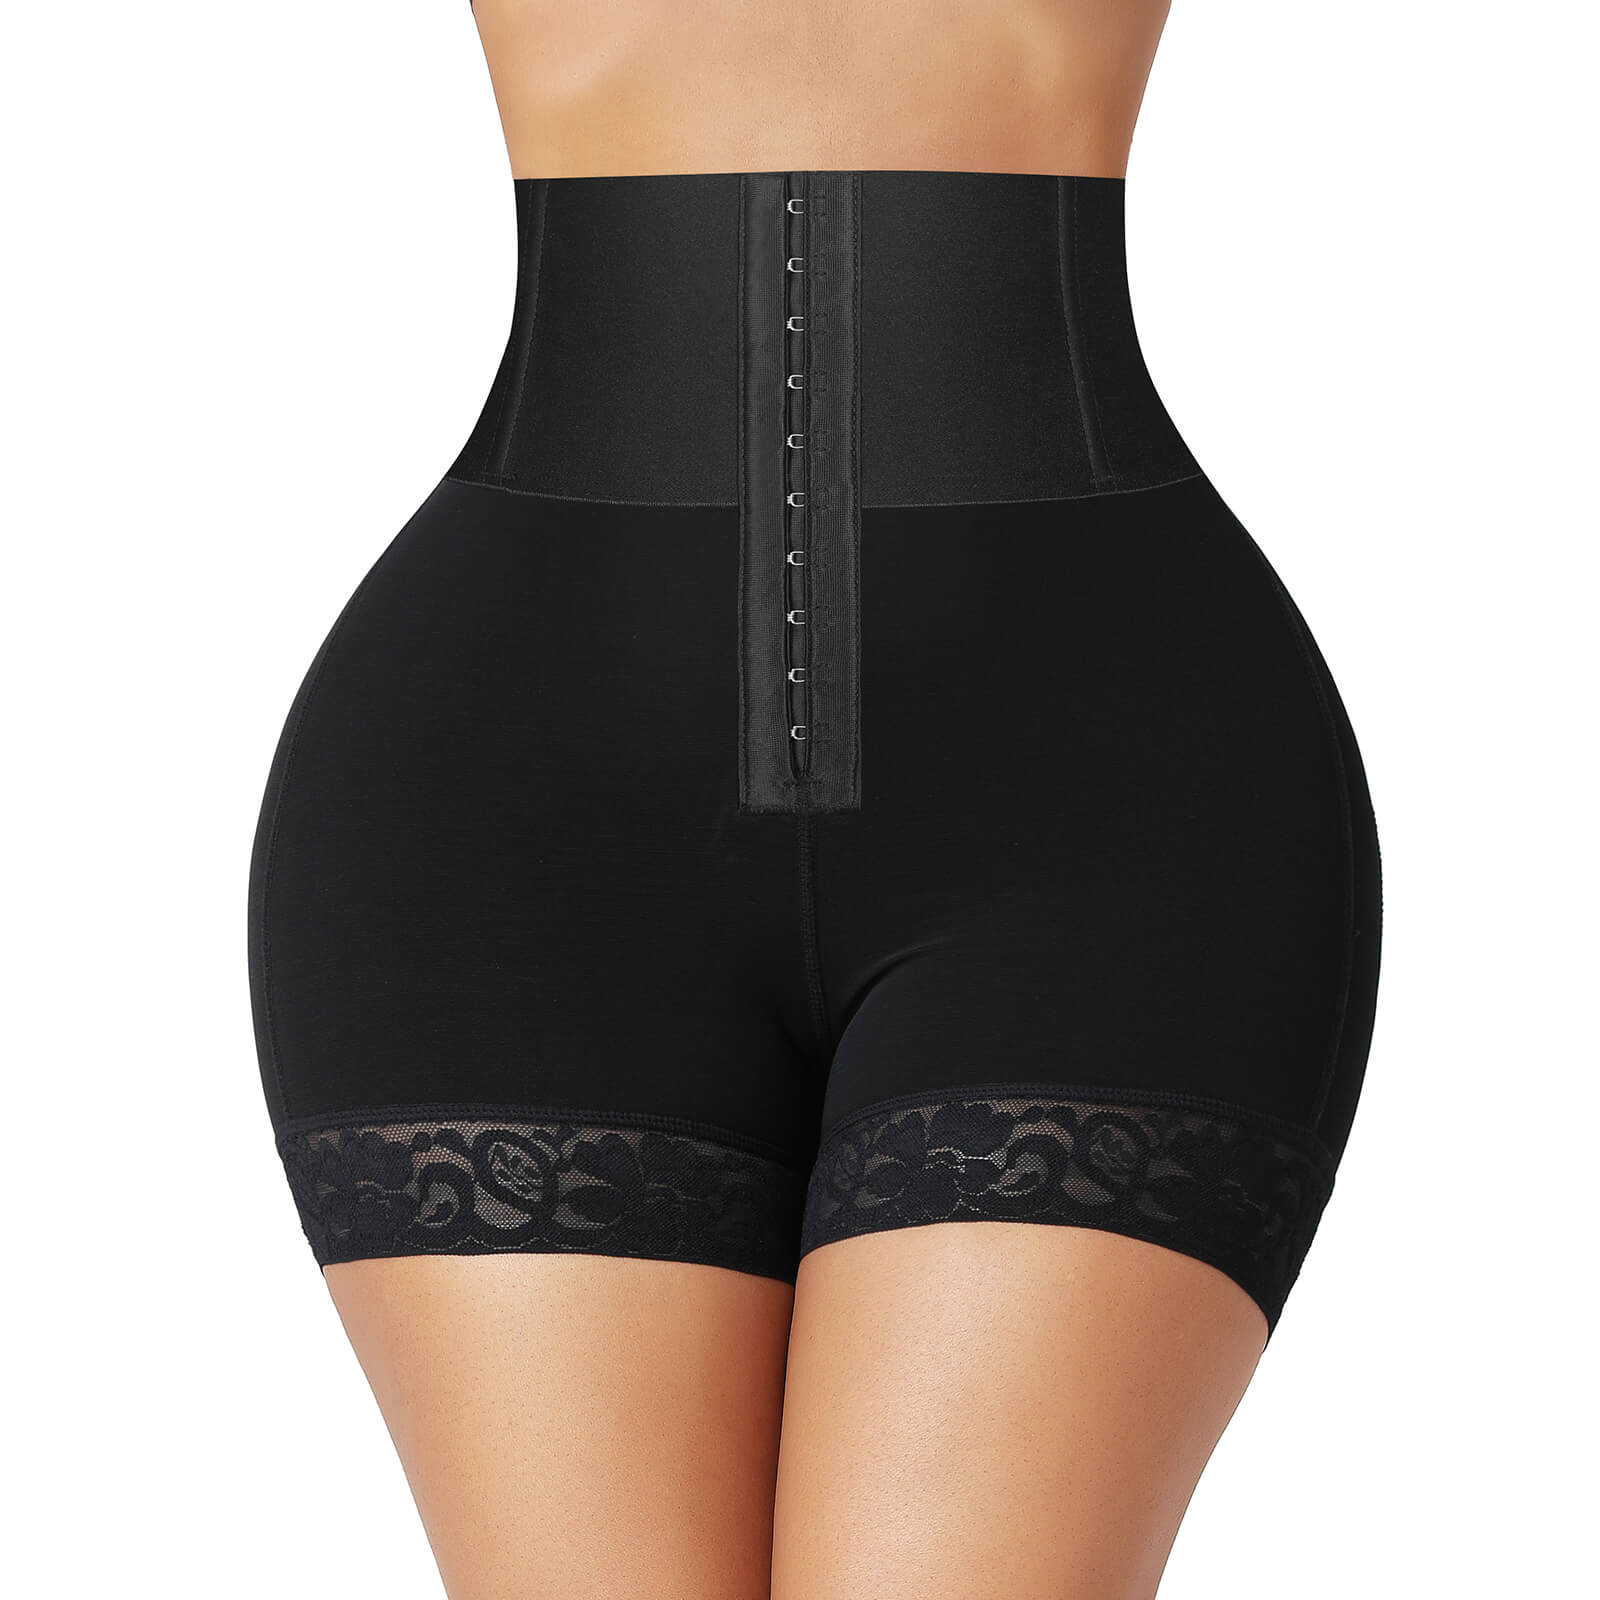 Wholesale Butt Lifter Cotton, Lace, Seamless, Shaping 